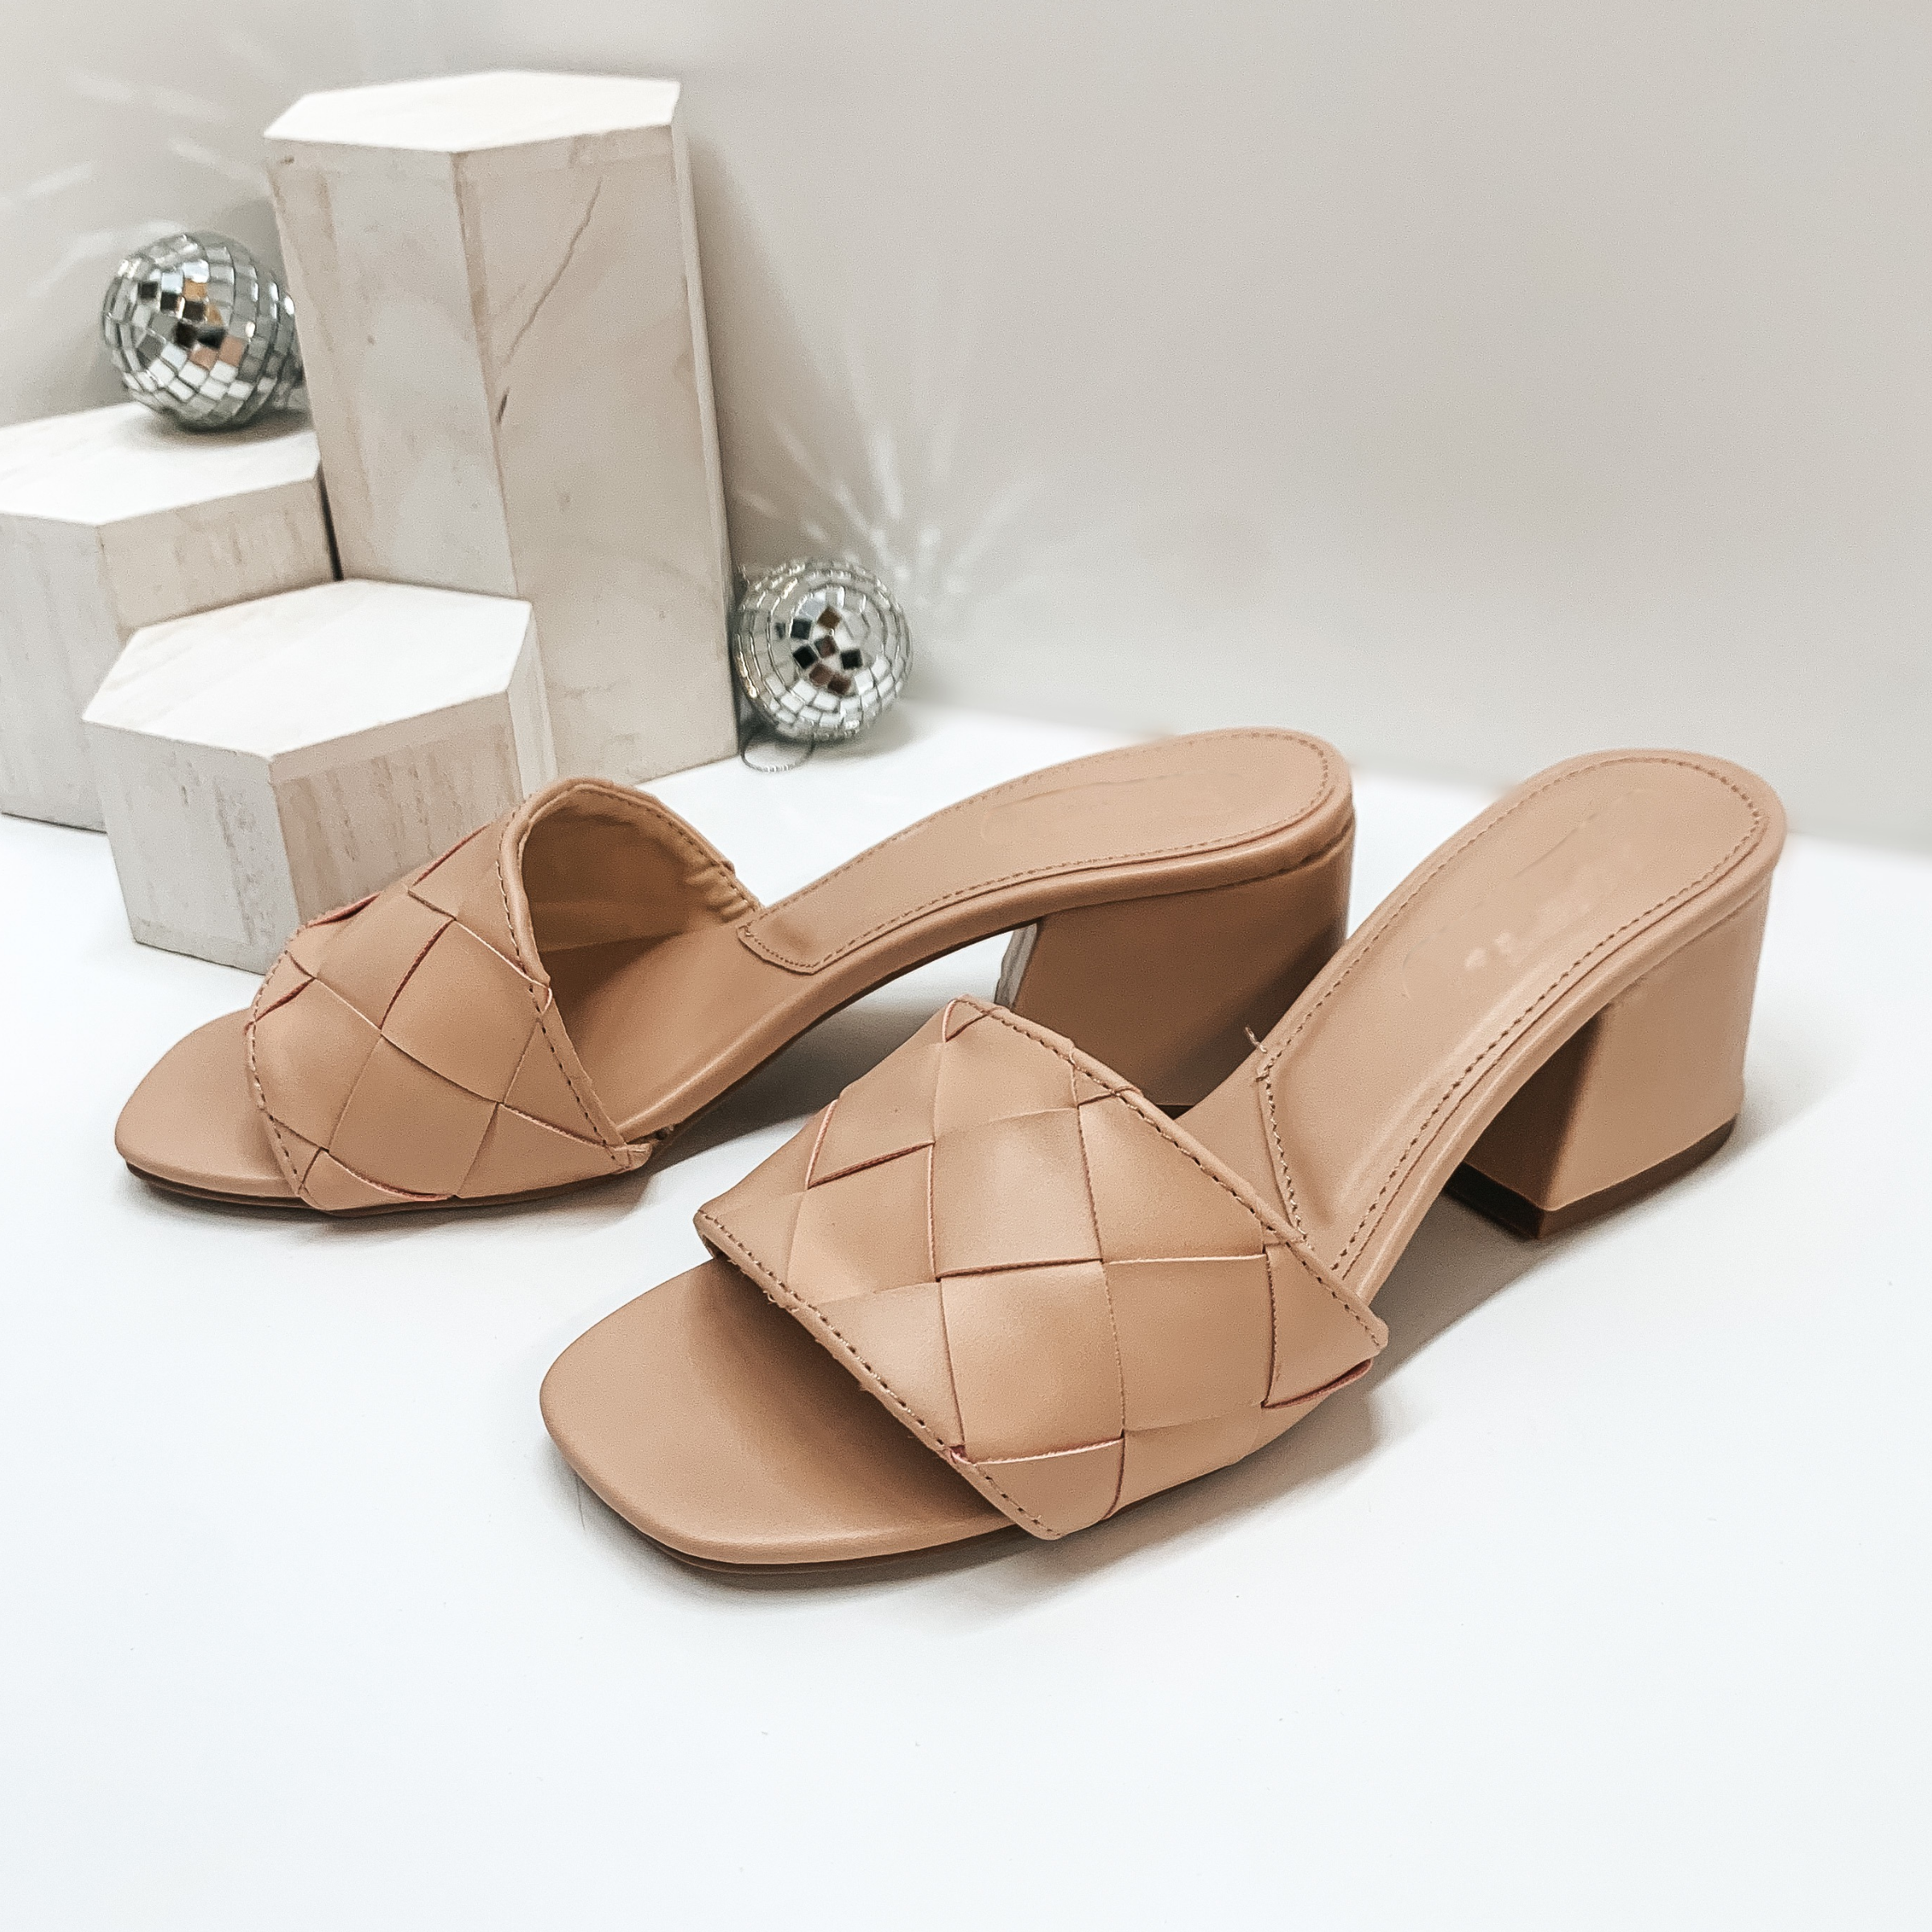 Paving the Way Mini Block Heels with Basket Weave Strap in Nude - Giddy Up Glamour Boutique